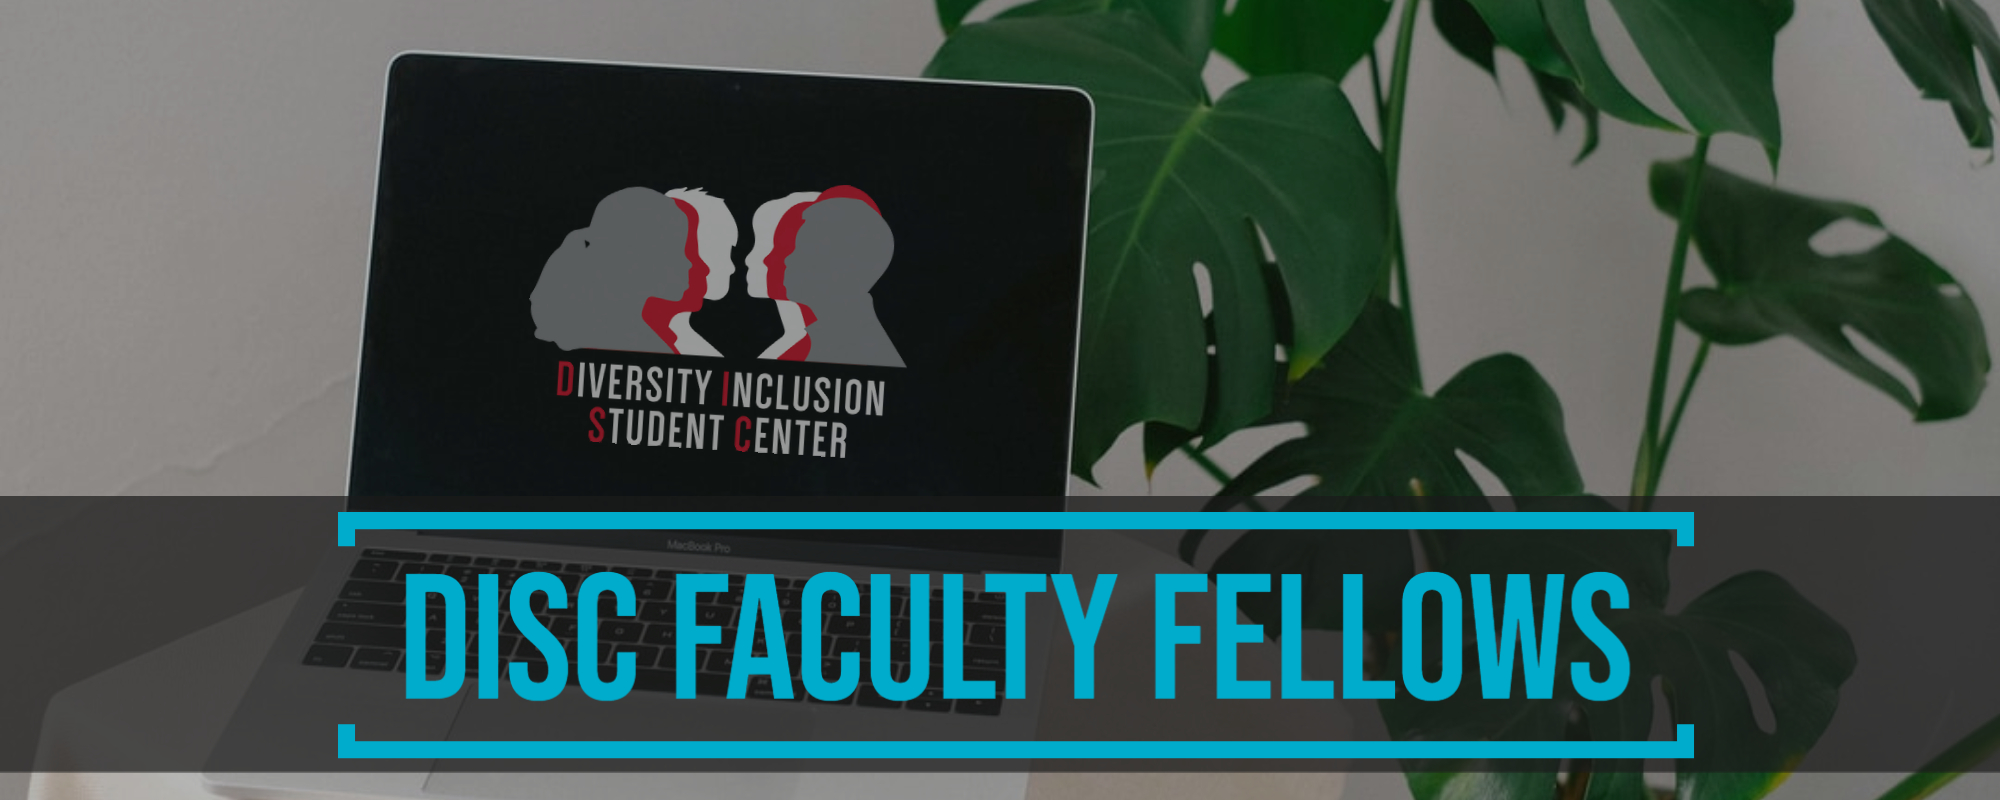 Laptop in the background with the text "Faculty Fellows" overlayed. 